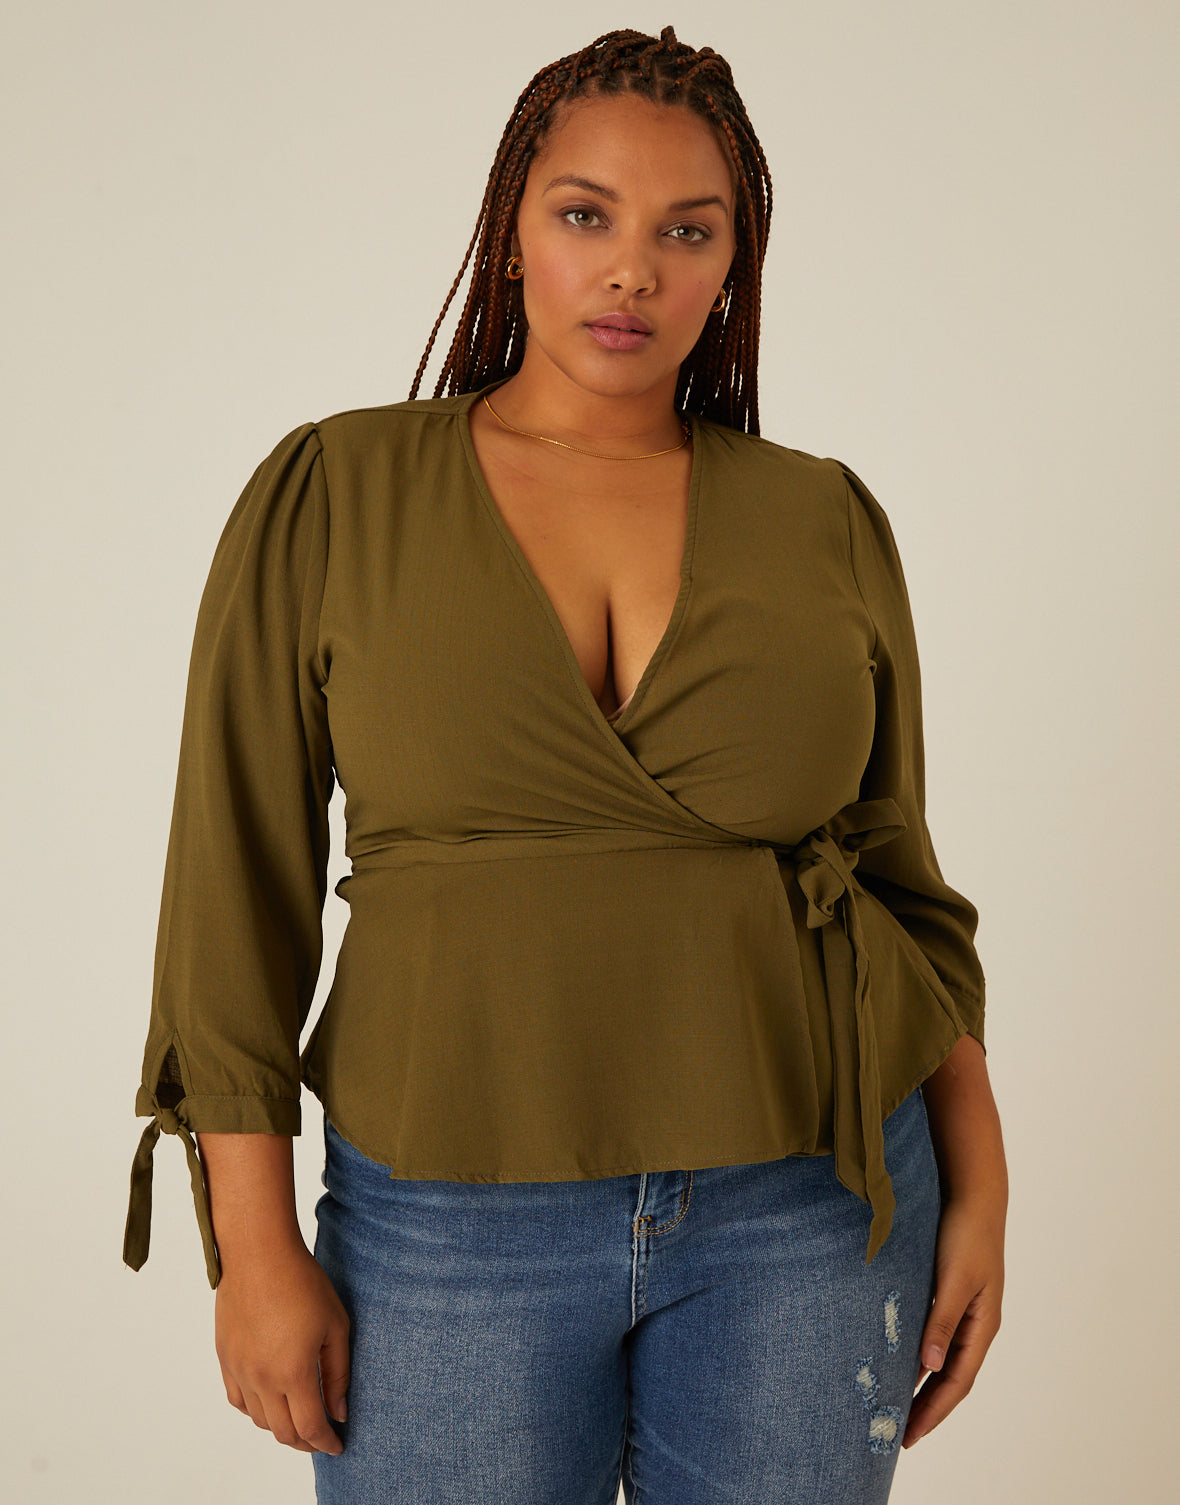 Green Wrap Top 3/4 Sleeve, 56% OFF